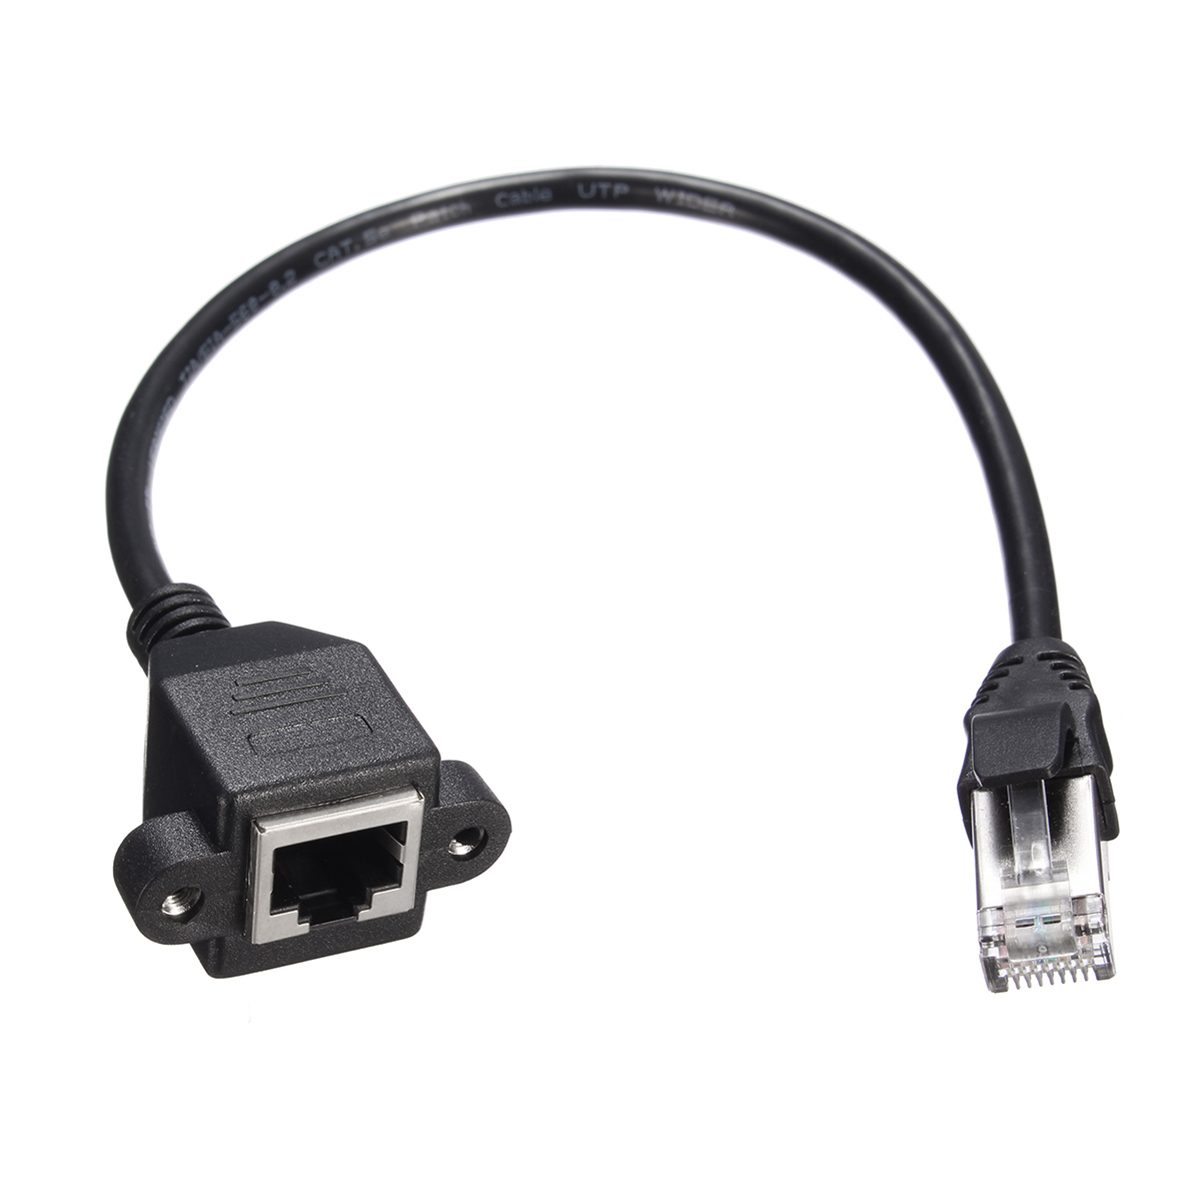 30cm/1M RJ45 Cable Male to Female Screw Panel Mount Ethernet LAN Network Extension Cable 78